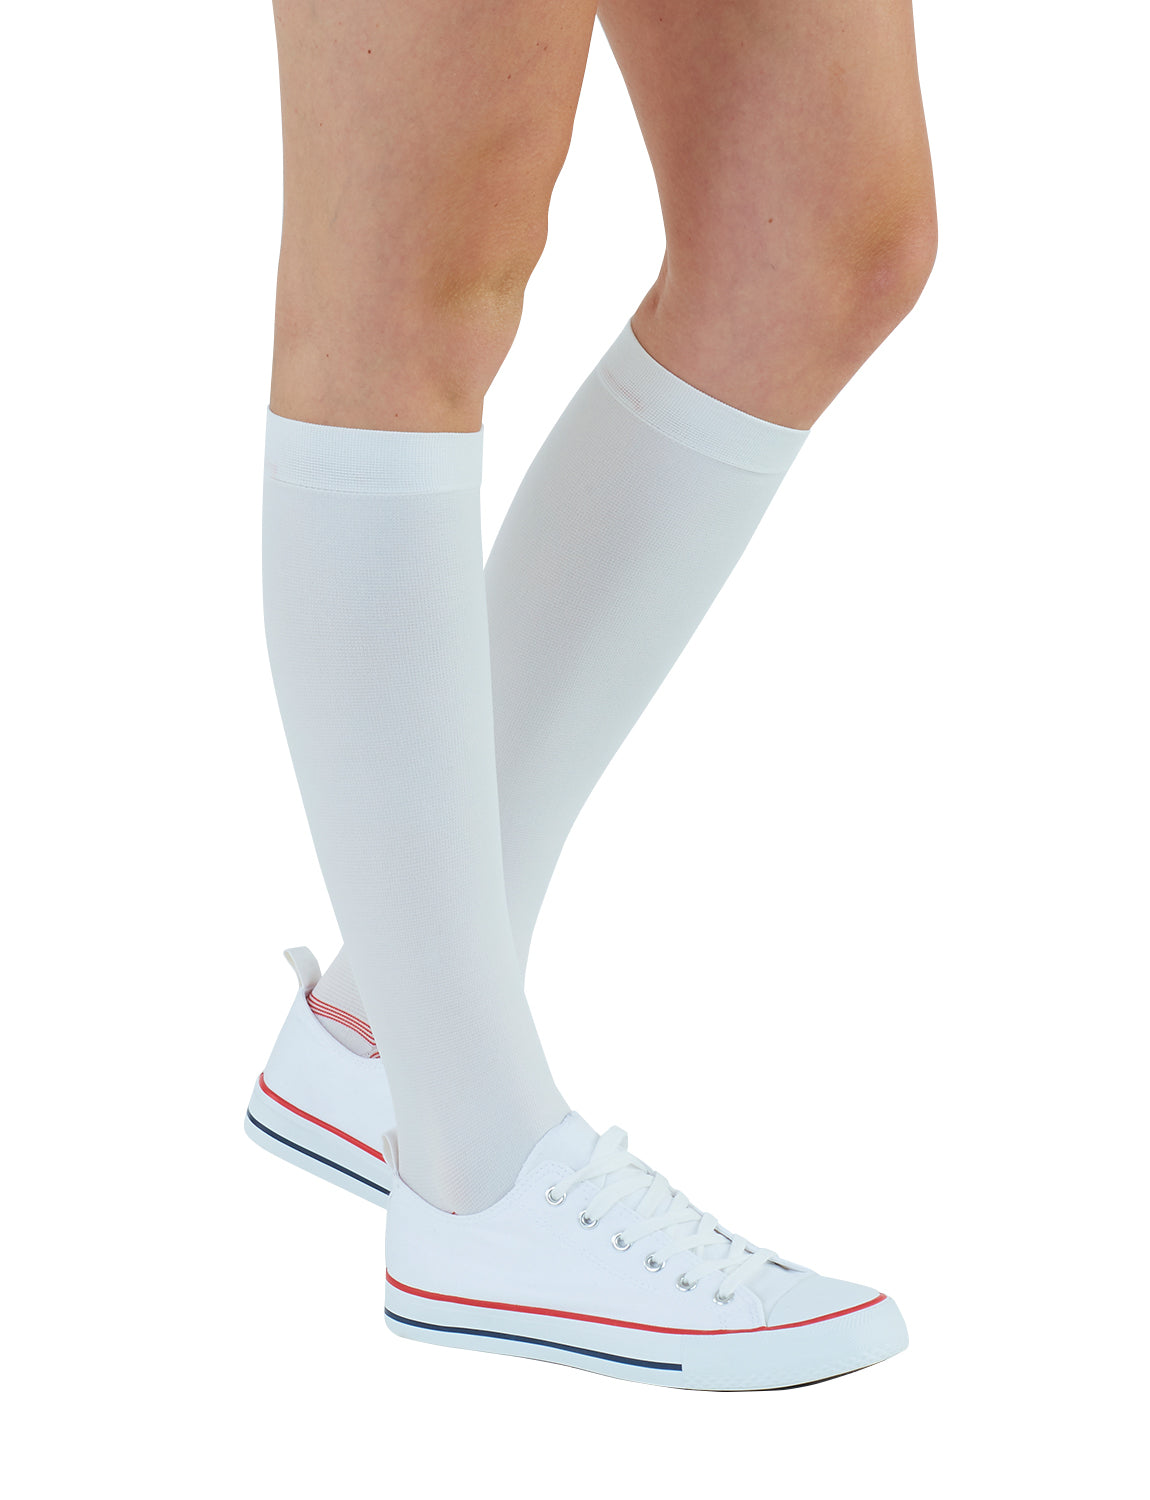  Neo G Anti-Embolism Compression Stockings Women and men -  Reduces risk of Deep Vein Thrombosis, for use Pre and Post surgery, helps  aid circulation, great as anti edema socks (Large, Polyamide